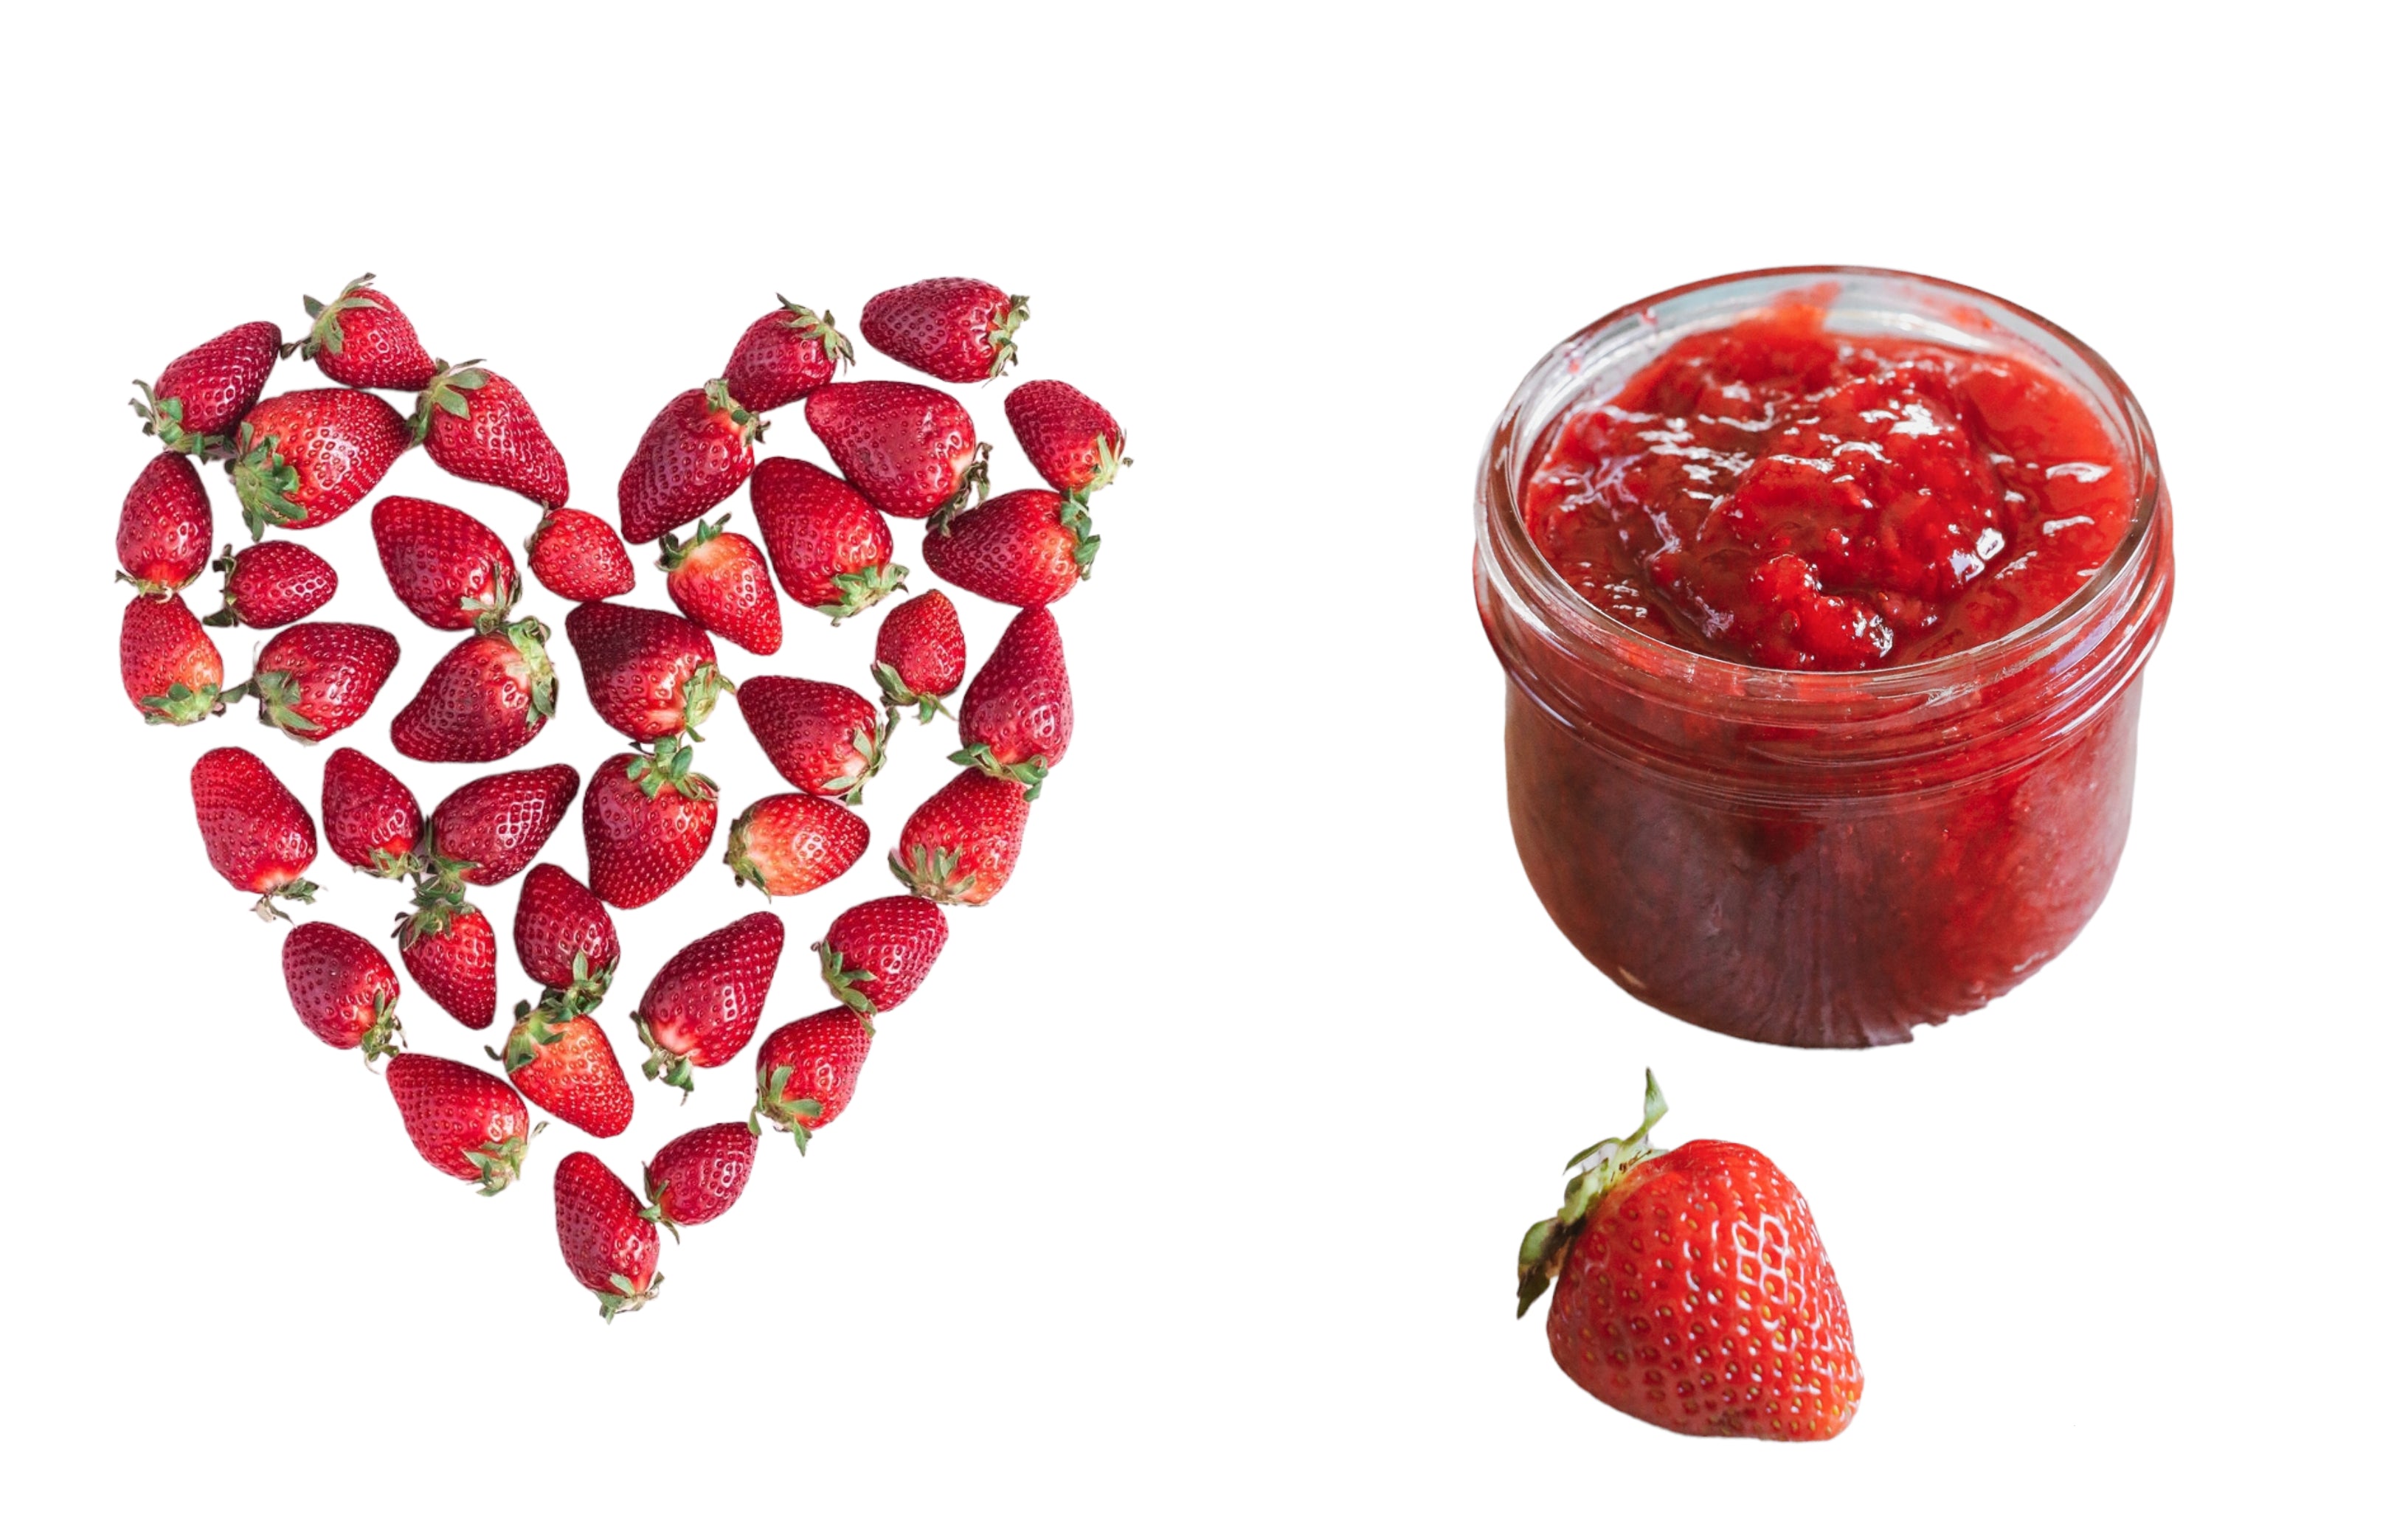 Greek Natural 100% Ηandmade Fruit Spread Strawberry with Honey 8